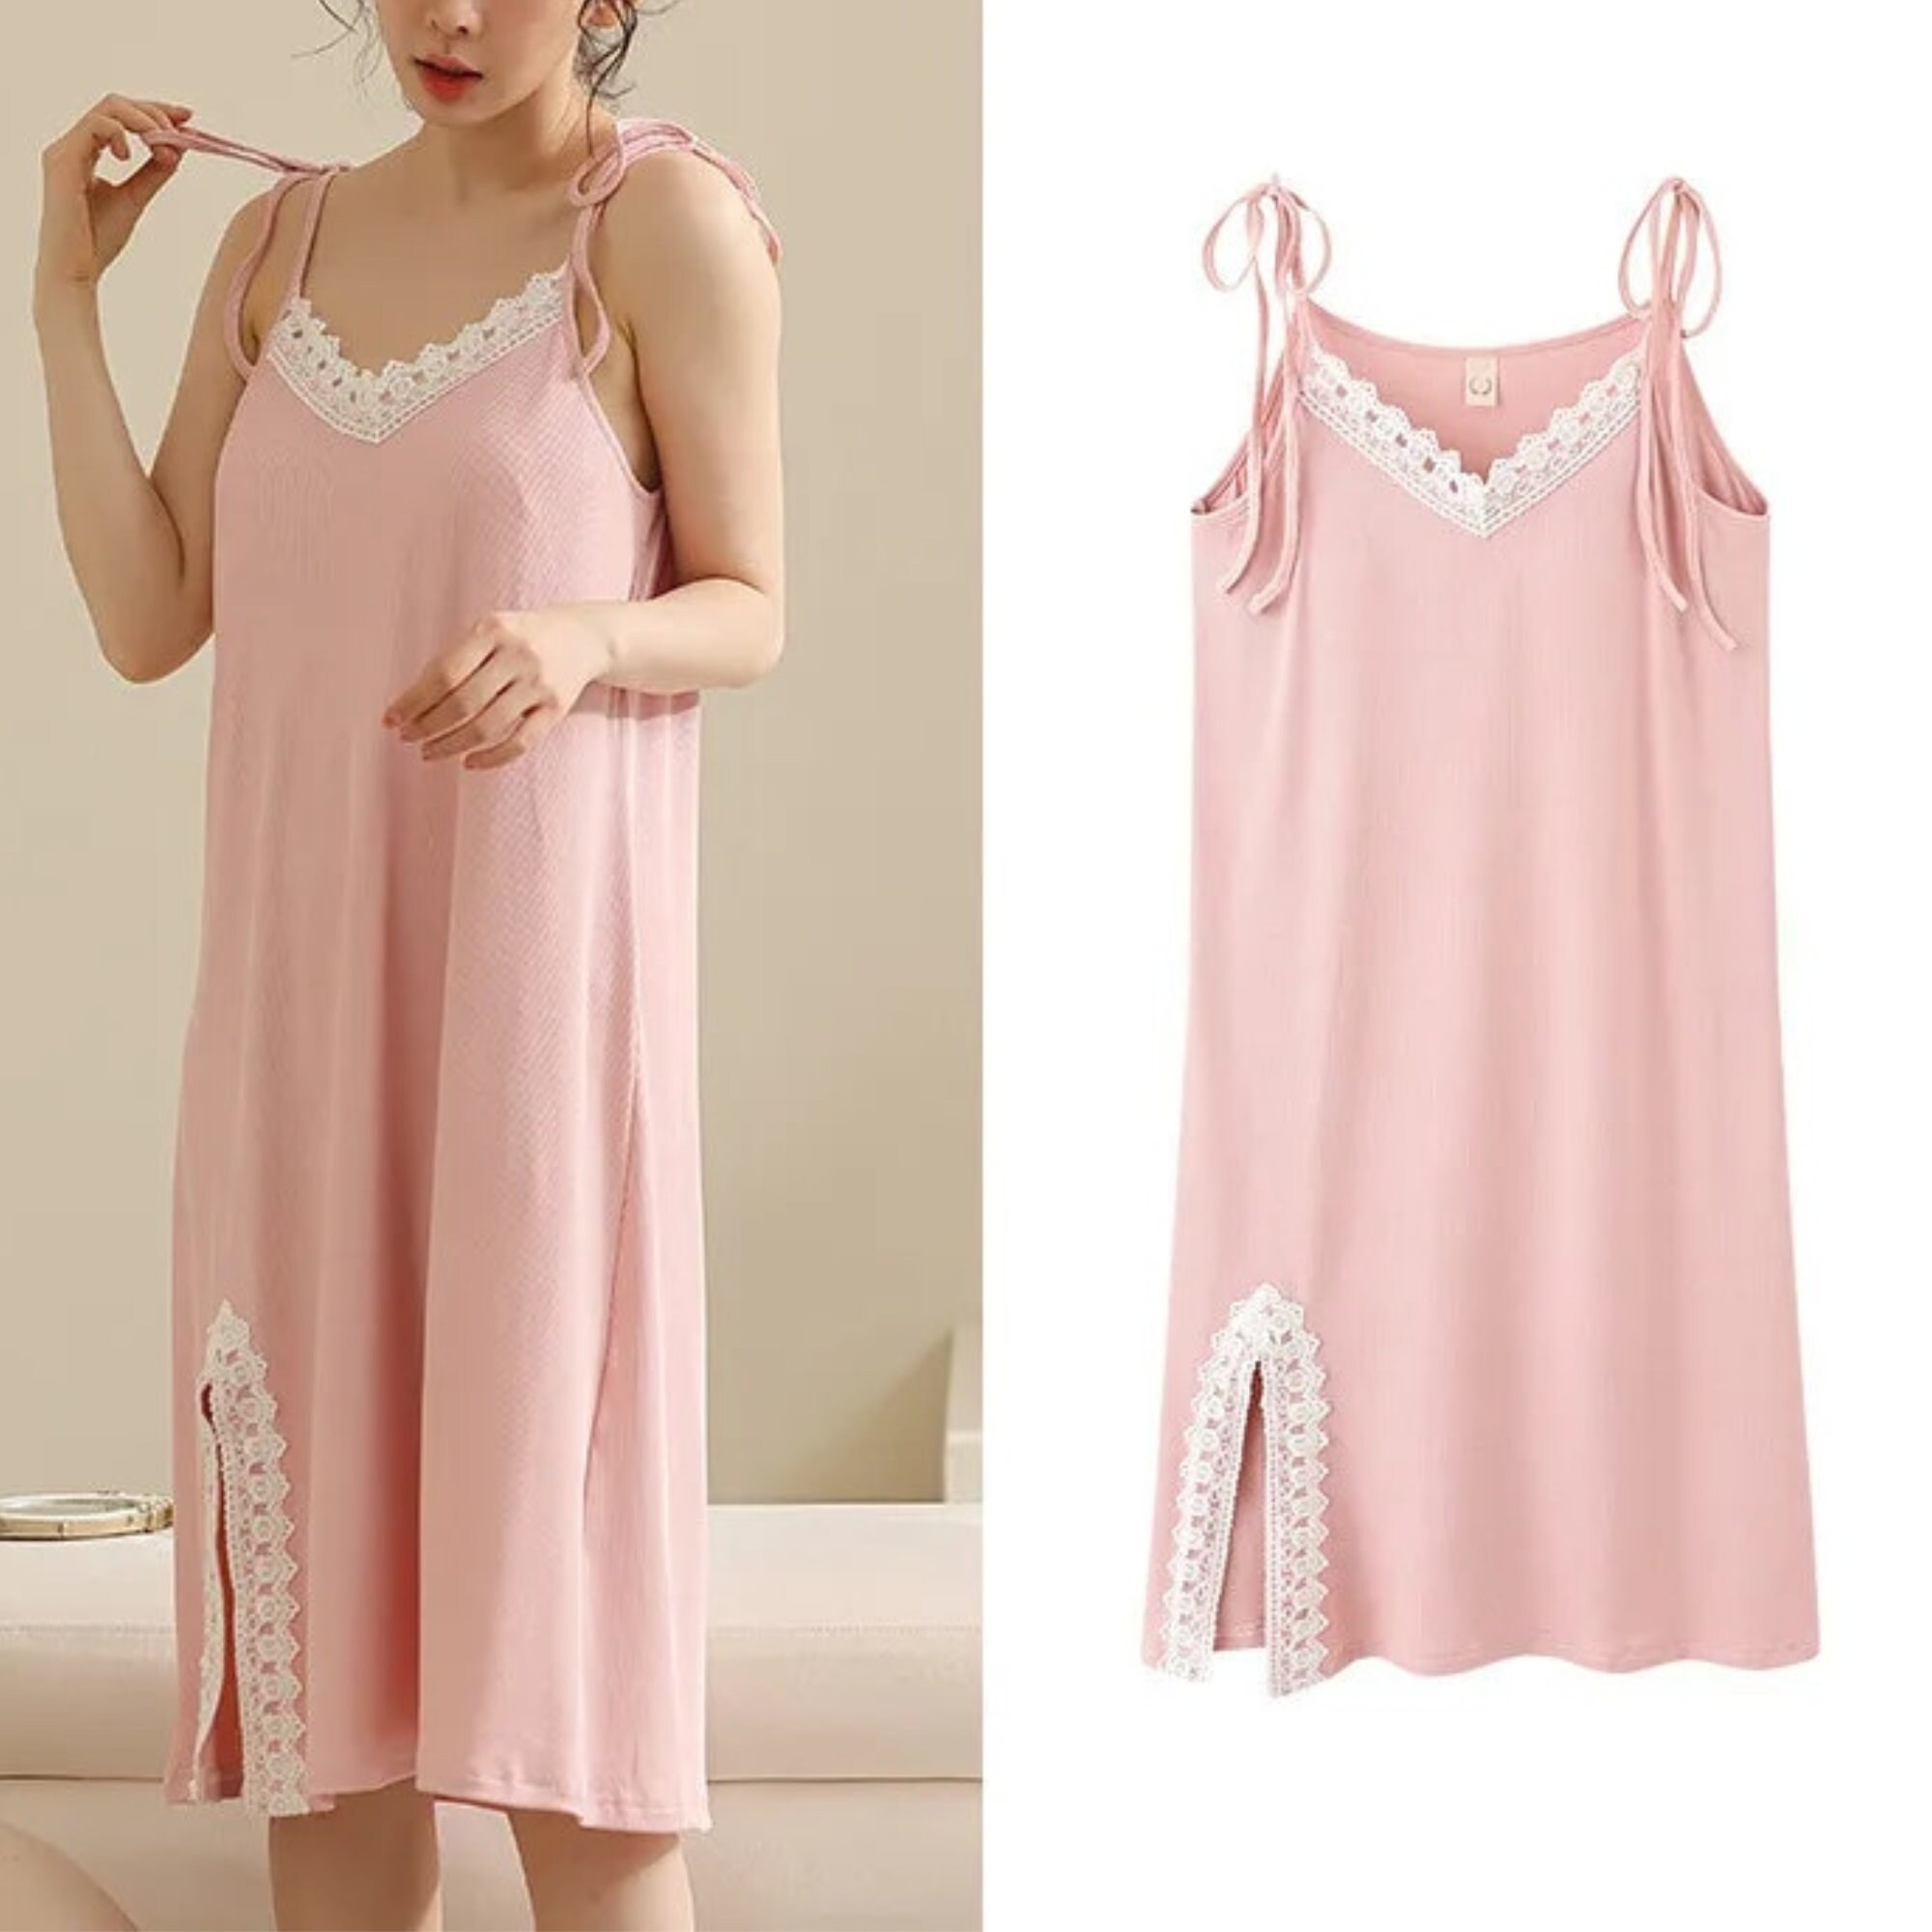 Sexy Lace Nightdress Set Back For Women Lounge Clothes, Sleepwear, Sling  Pajamas M3492 From Hltrading, $2.37